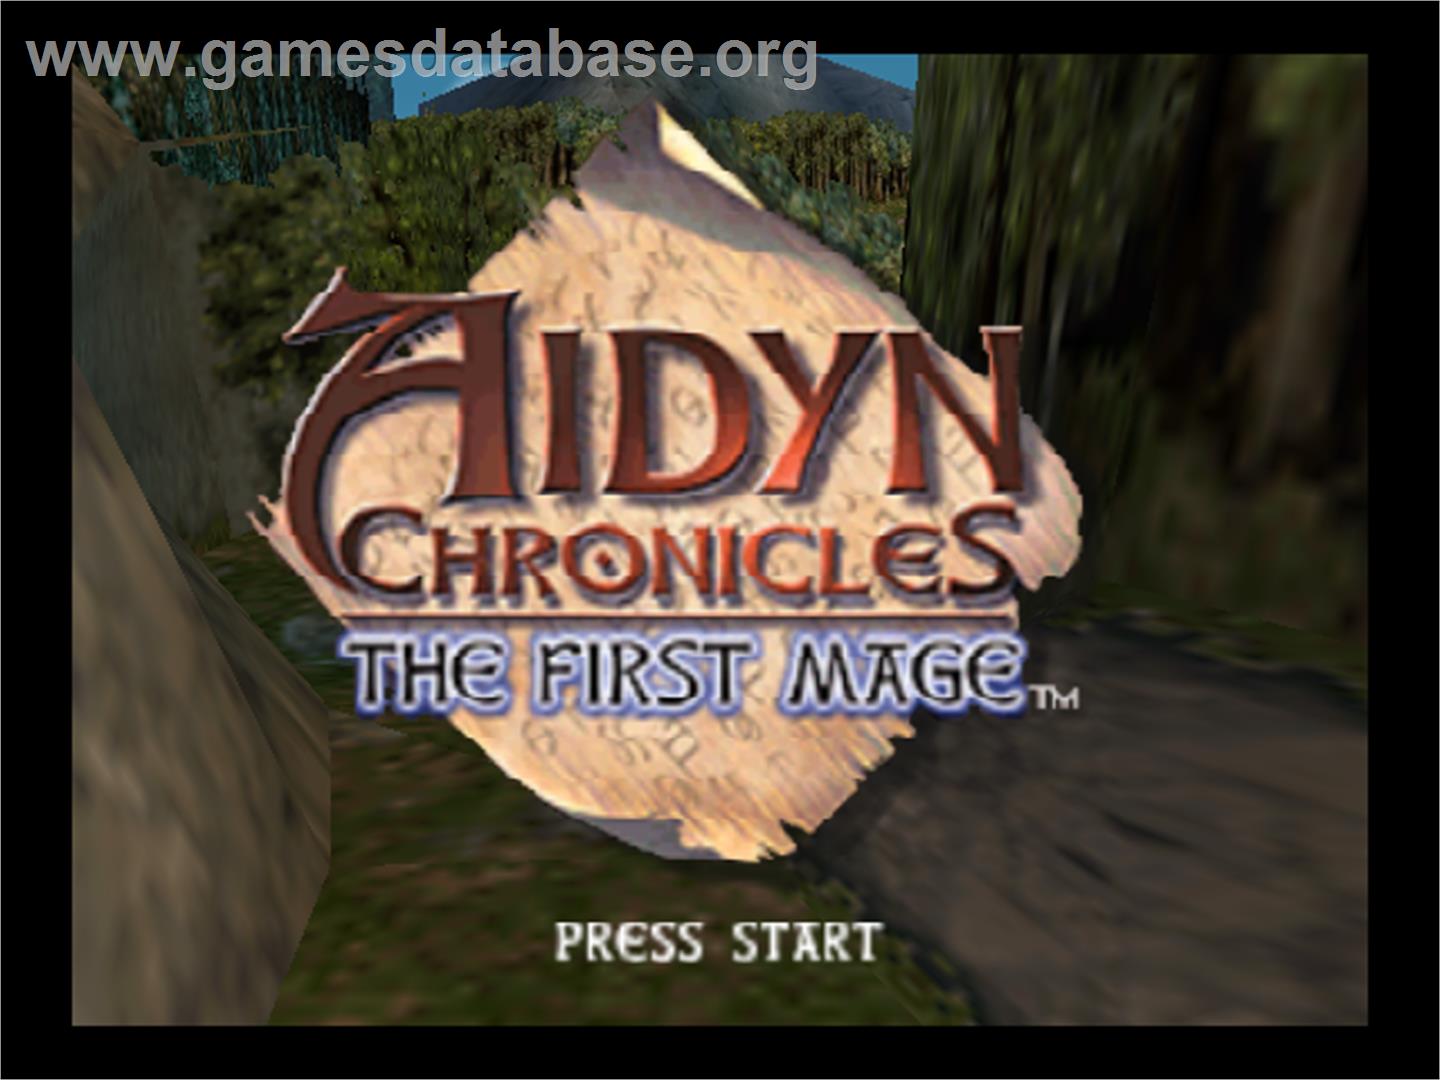 Aidyn Chronicles: The First Mage - Nintendo N64 - Artwork - Title Screen